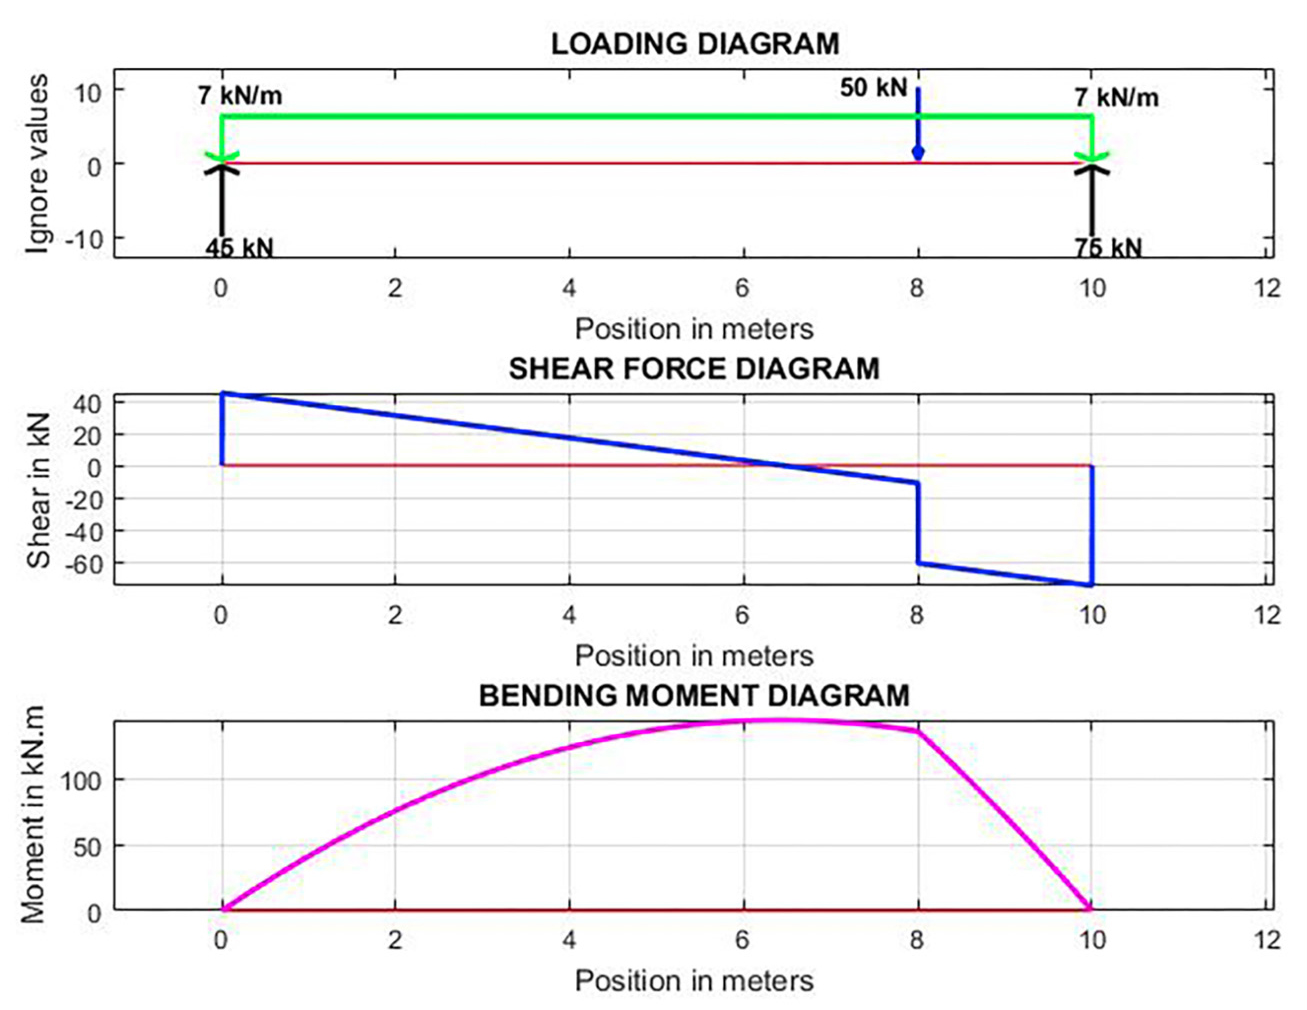 Loading, shear, and bending moment diagrams produced by ReshmoBeam.